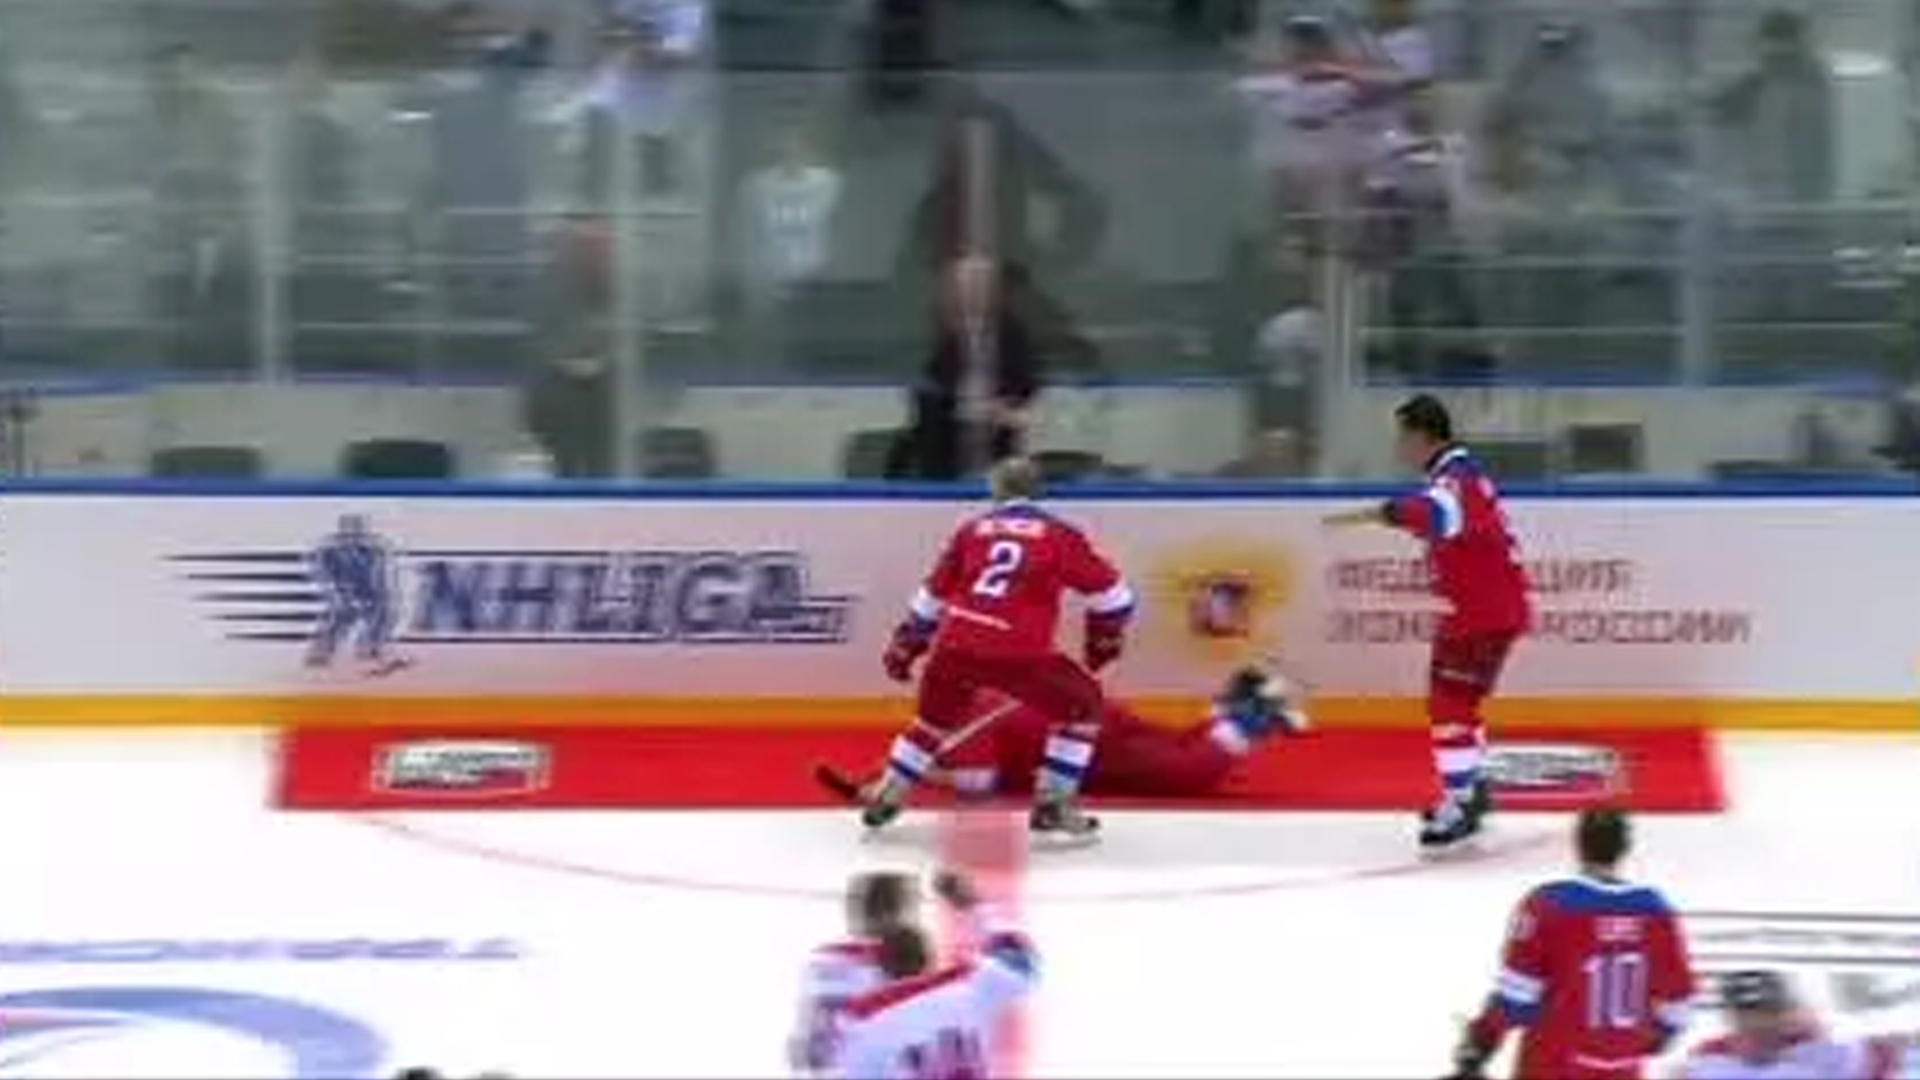 Putin Tries to Take Victory Lap, Faceplants on the Ice Instead - Thumbnail Image